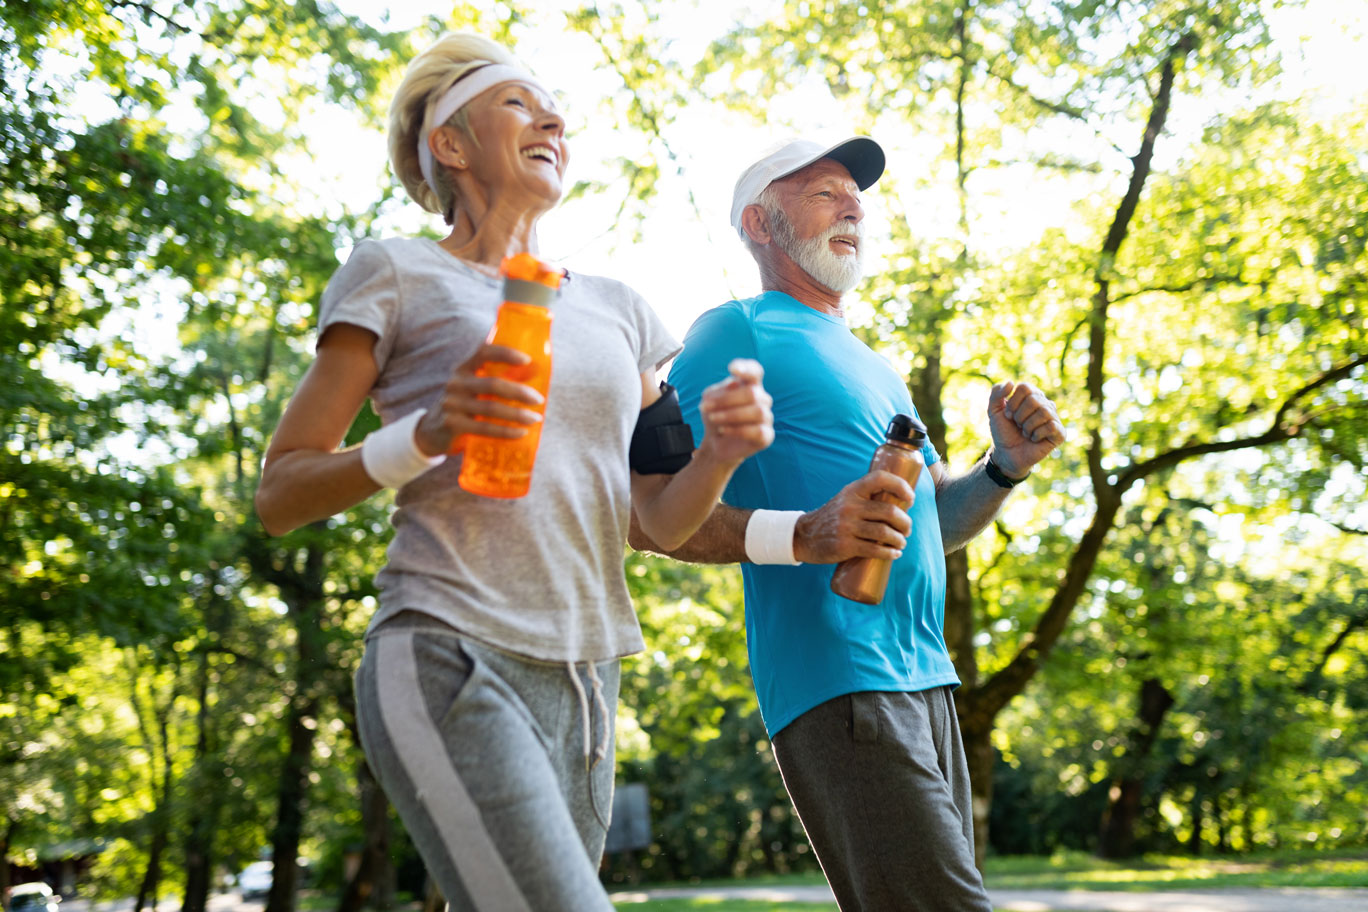 Healthy Ageing: Staying Fit and Active